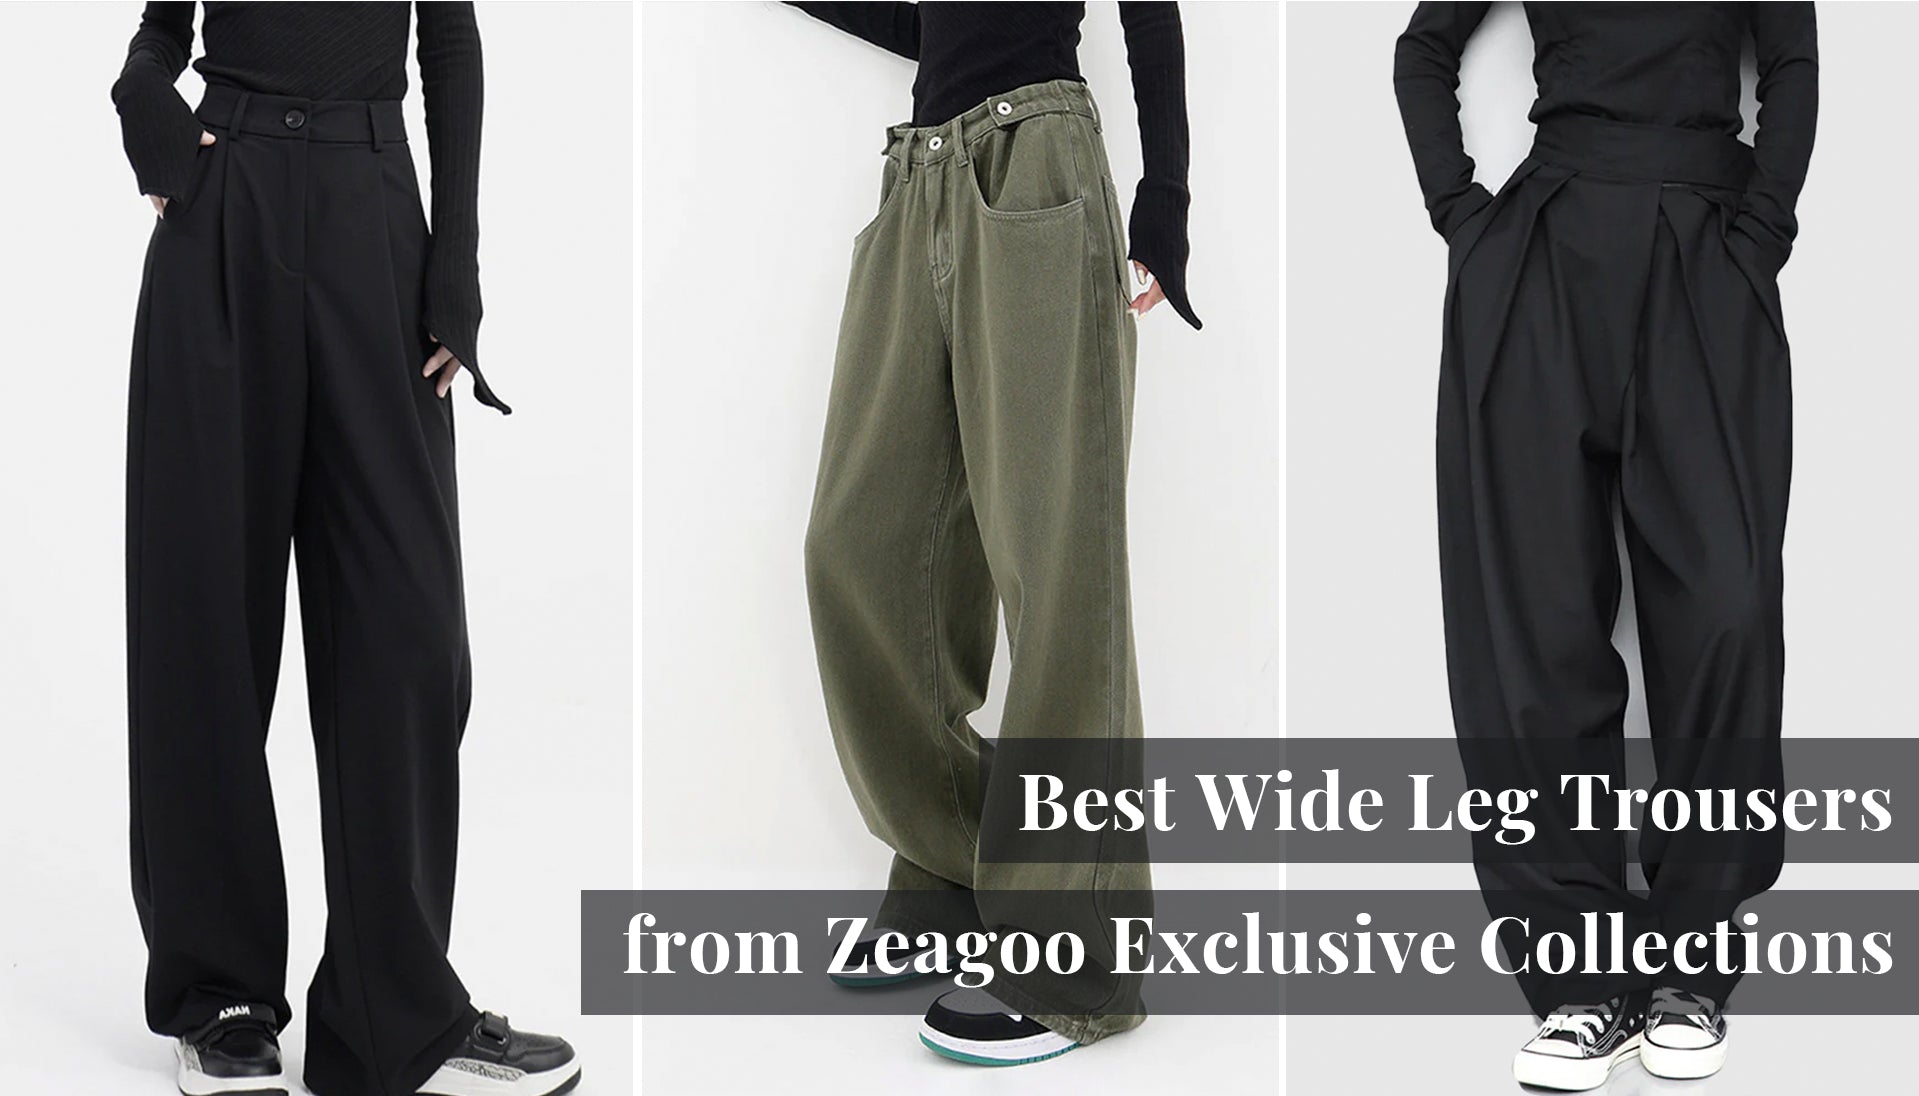 Black High Waist Wide Leg Pants from Zeagoo Exclusive Collections